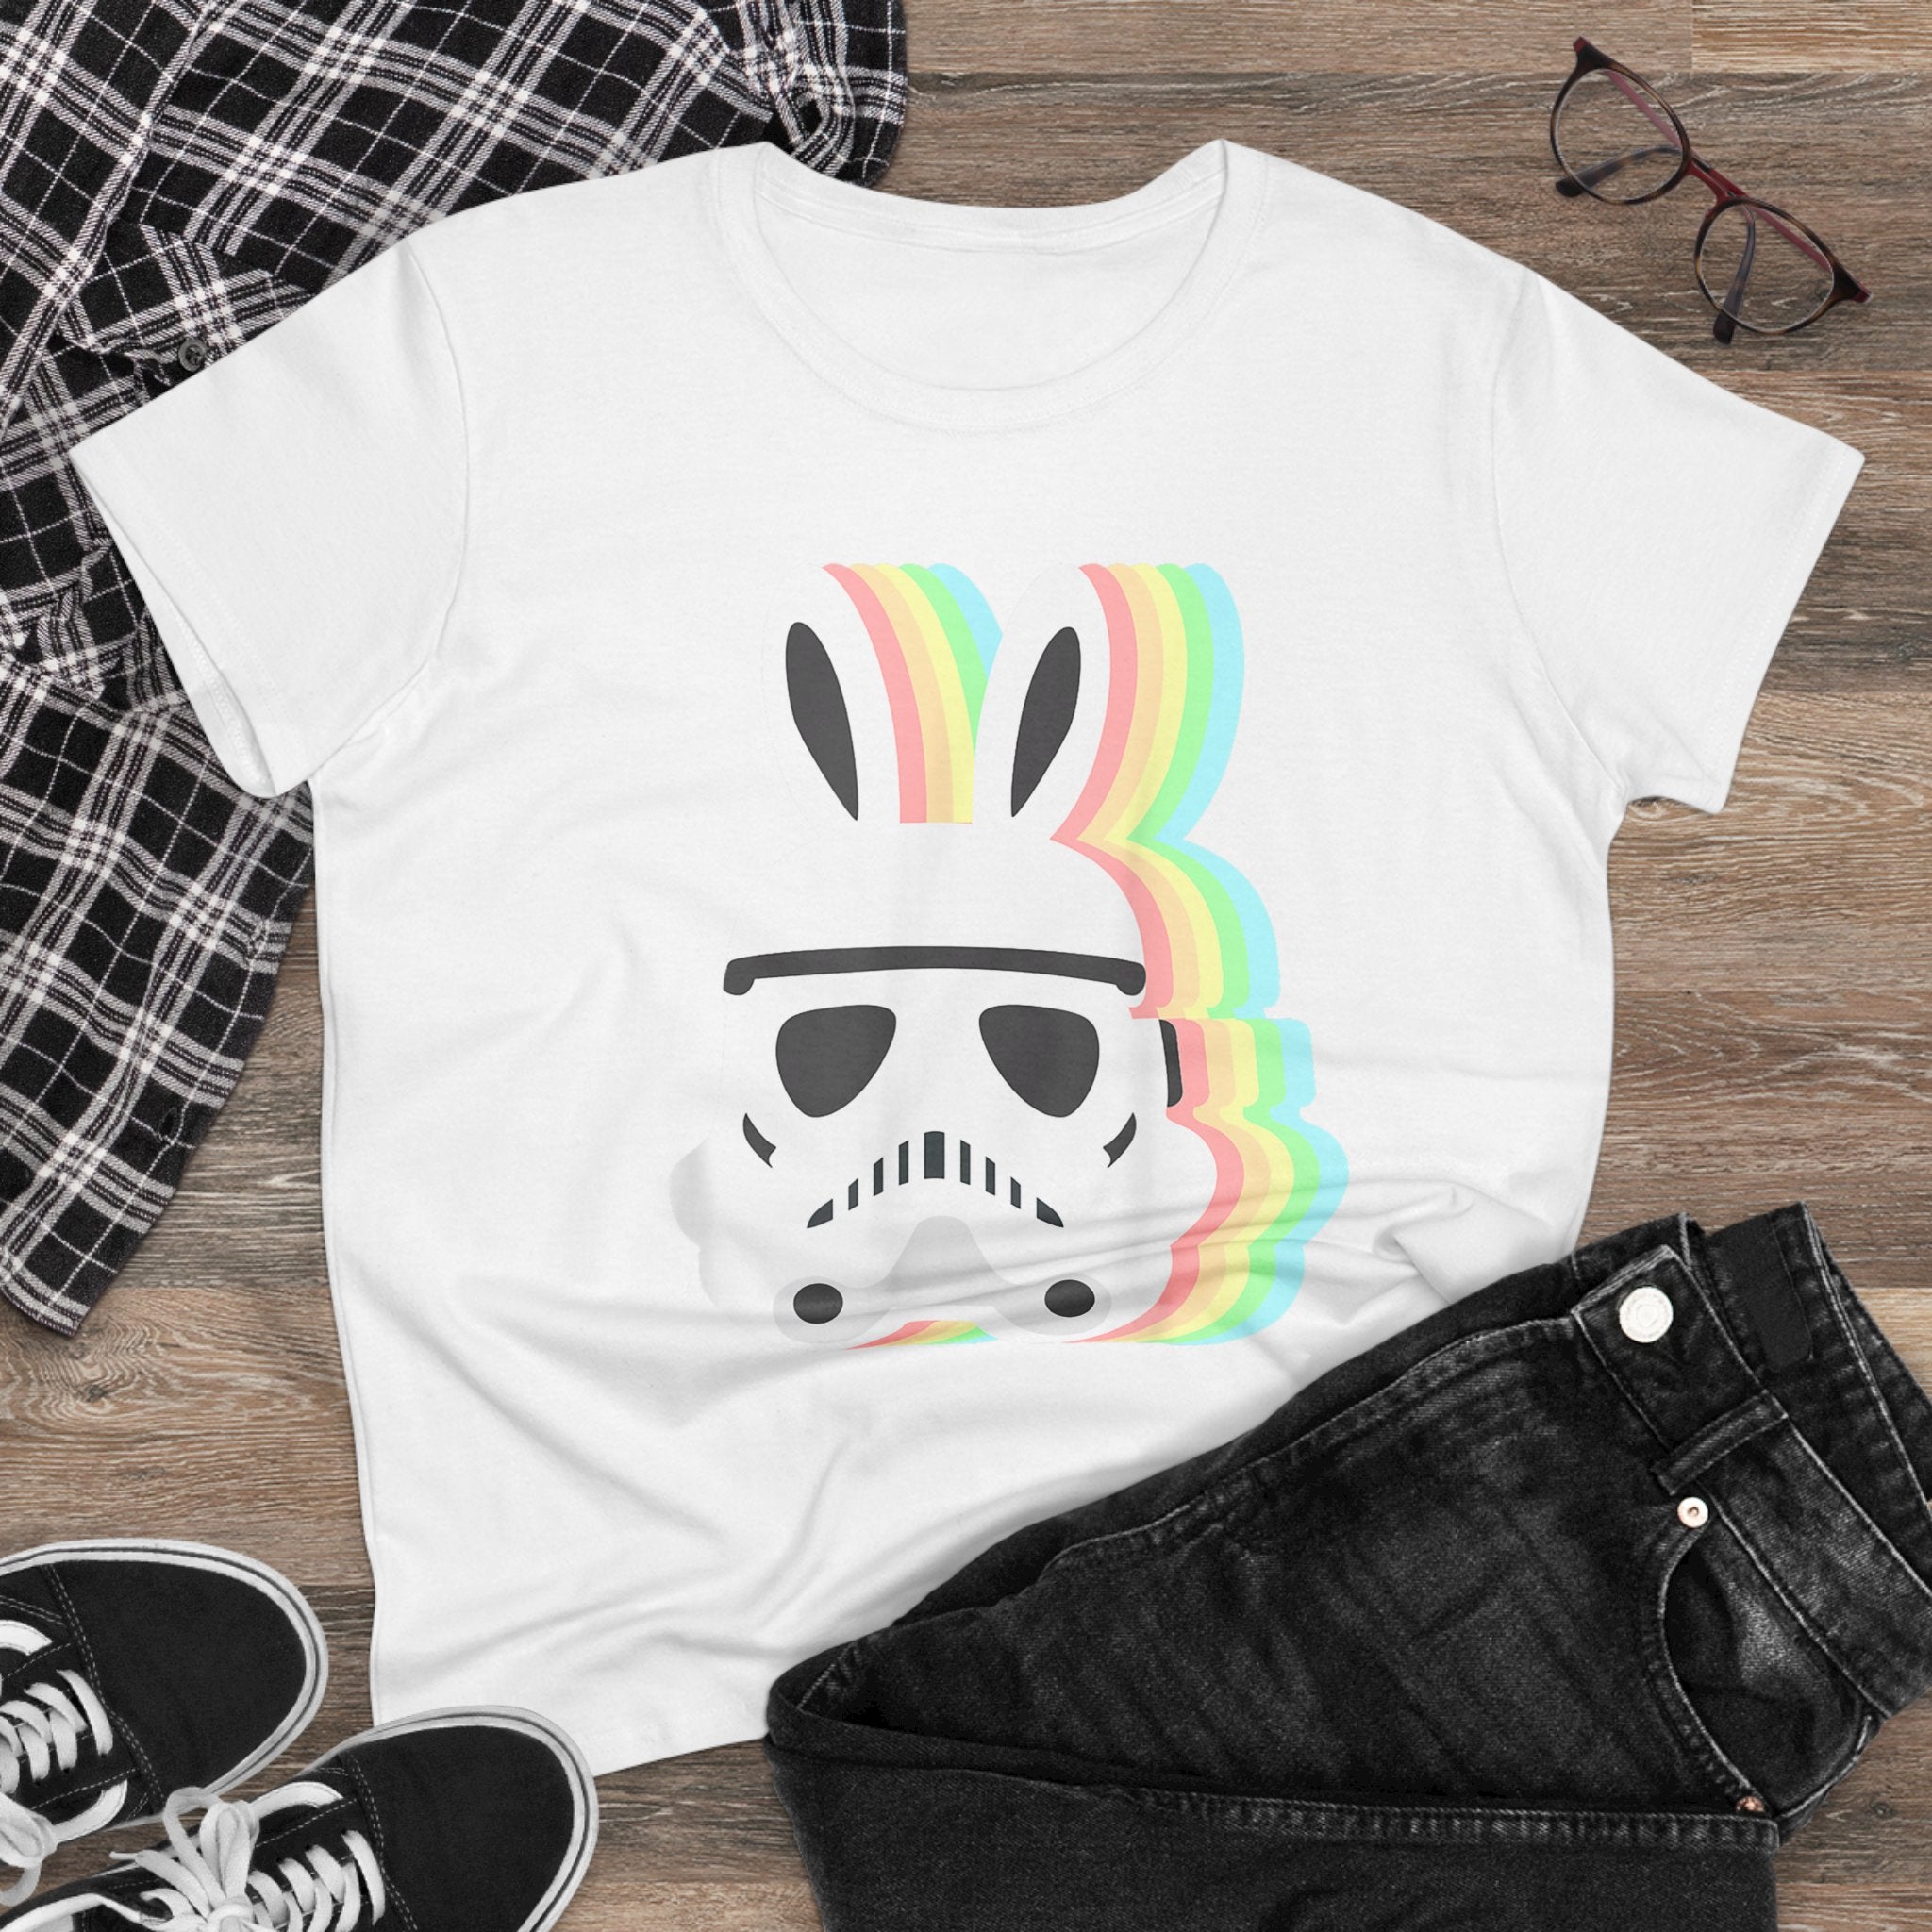 A Star Wars Easter Stormtrooper - Women's Tee featuring an Easter Stormtrooper helmet with bunny ears and rainbow stripes. The white t-shirt is laid on a wooden surface next to black jeans, a plaid shirt, and a pair of glasses. Perfect for Star Wars fans with a playful twist!